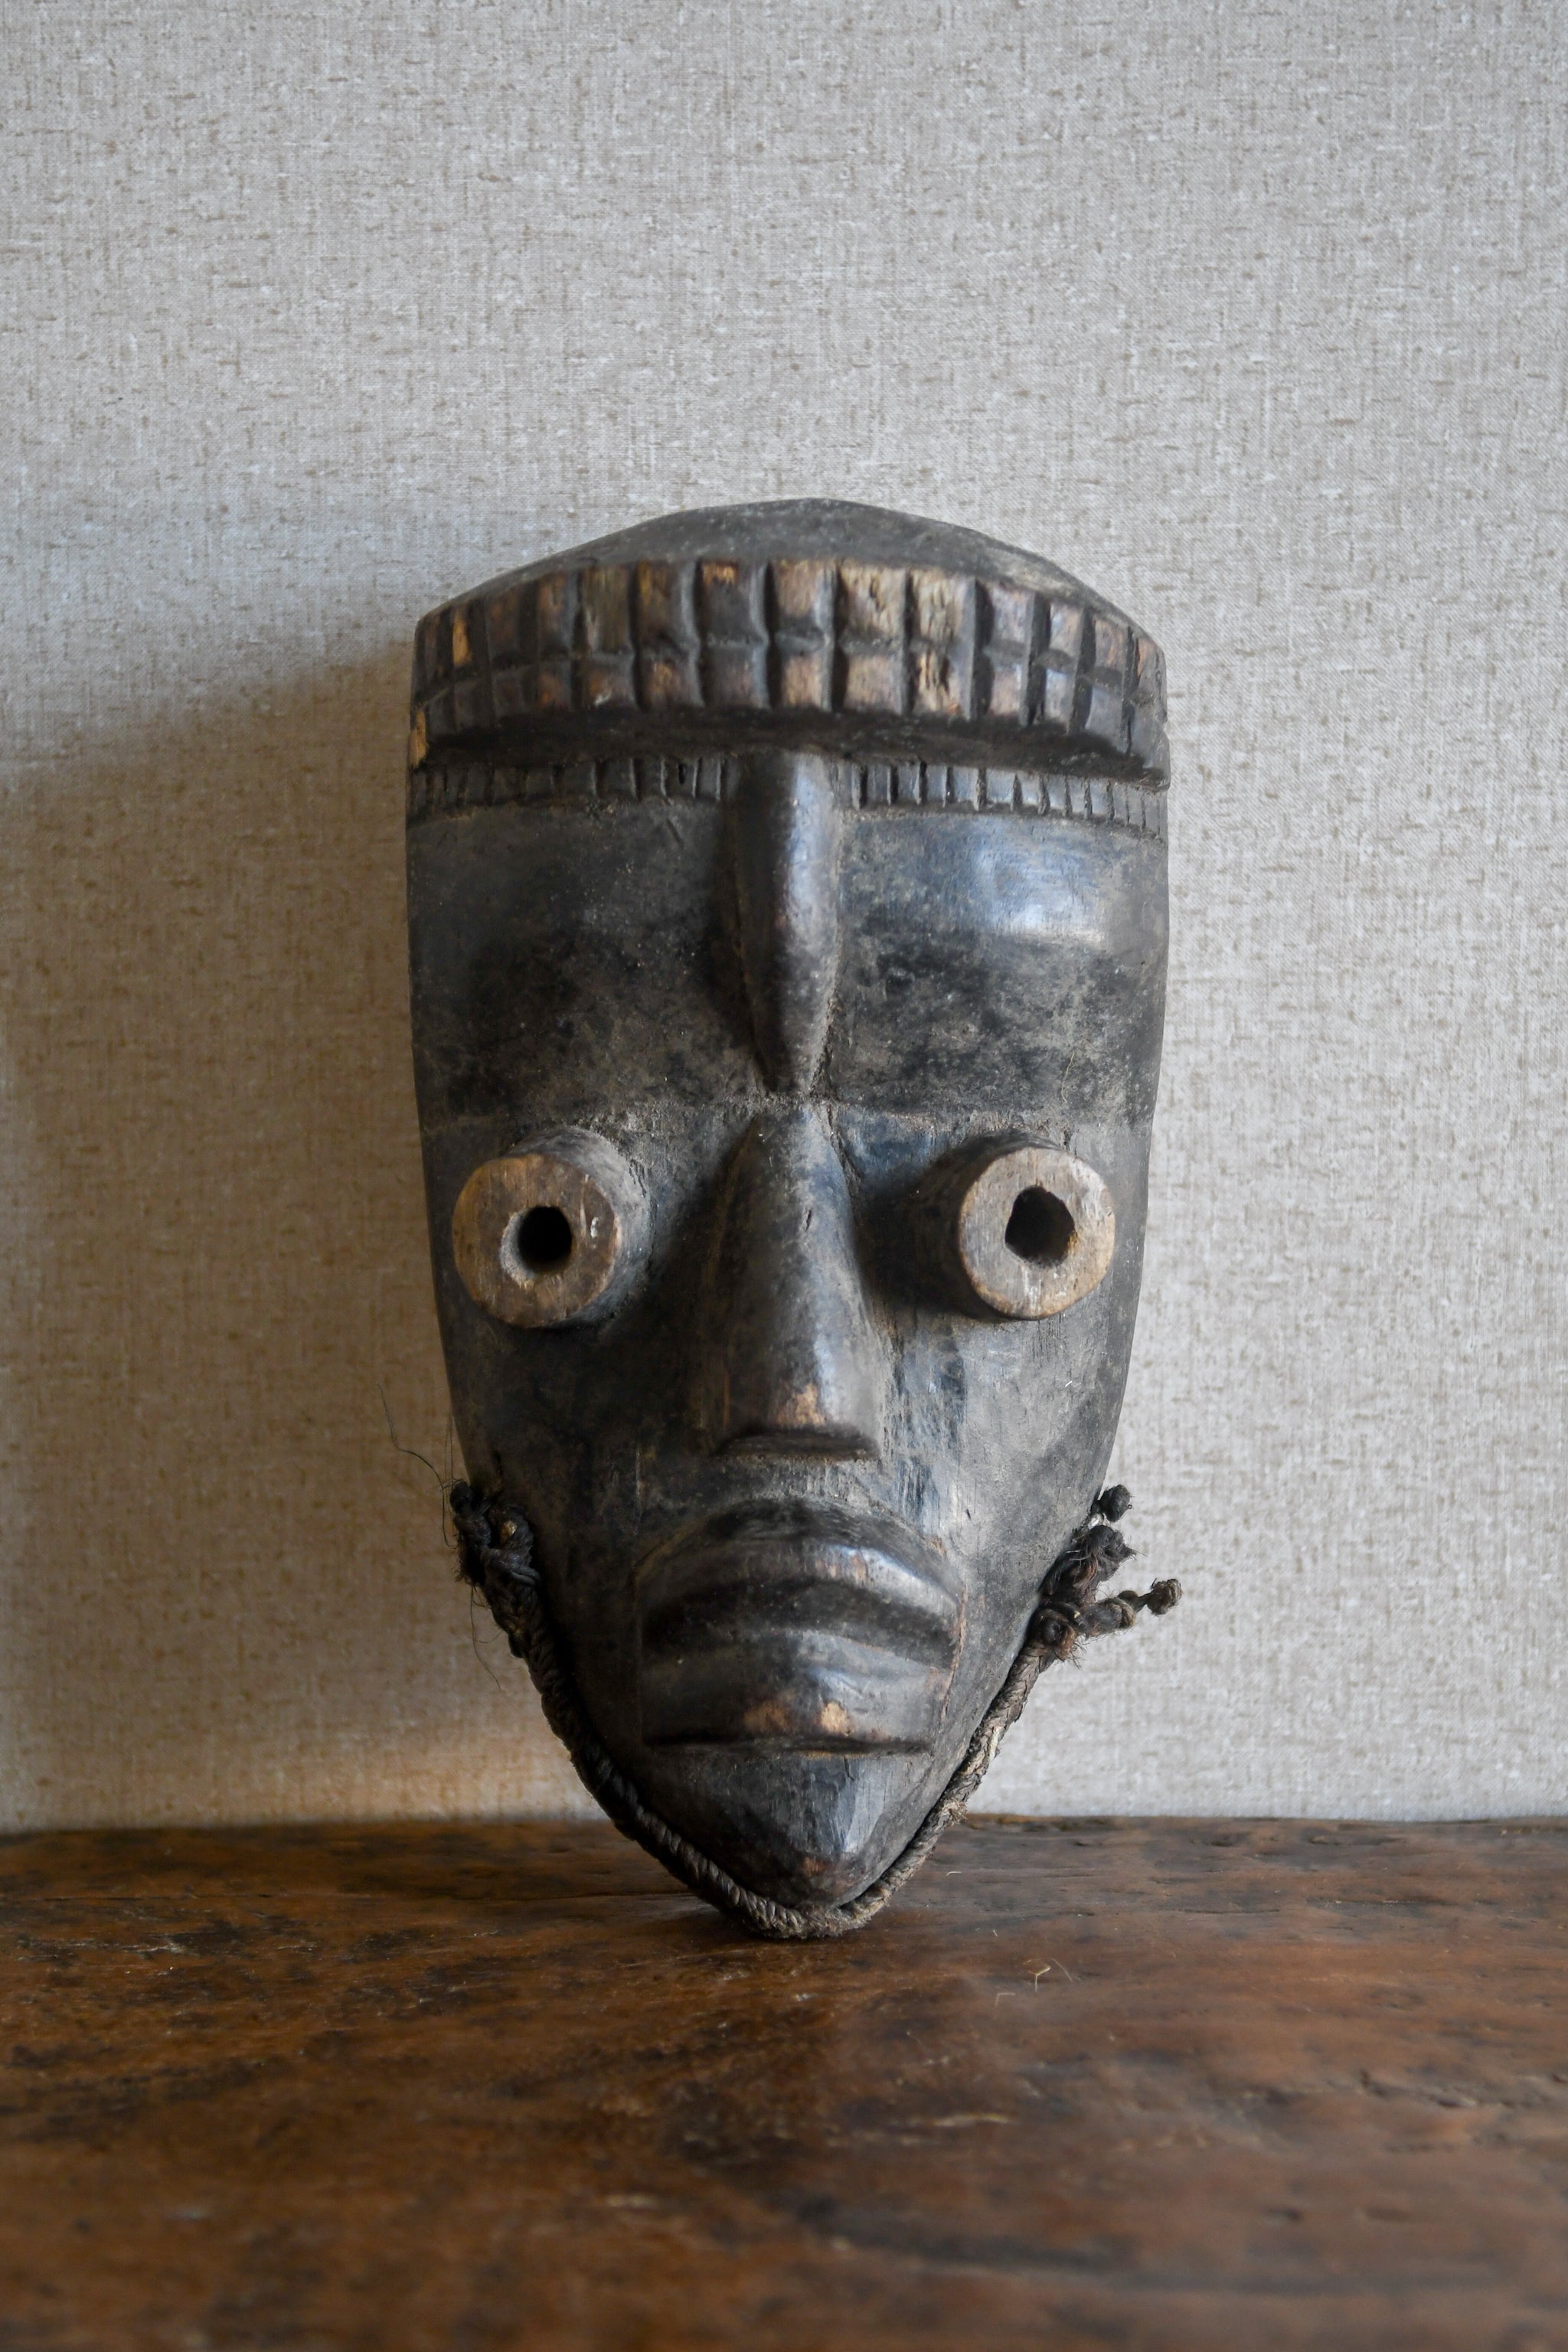 Tribal Masks - Handcrafted - Bete Masks - Traditional Folk Art - African Artifacts Sculptures - African Art Collector - This Bete Kran Mask, Wood, is hand-carved by artisans from Ivory Coast. It is intricately detailed, with a realistic, textured finish. Ideal for collectors or as a stand-out statement piece, this mask is an exquisite example of African artistry.